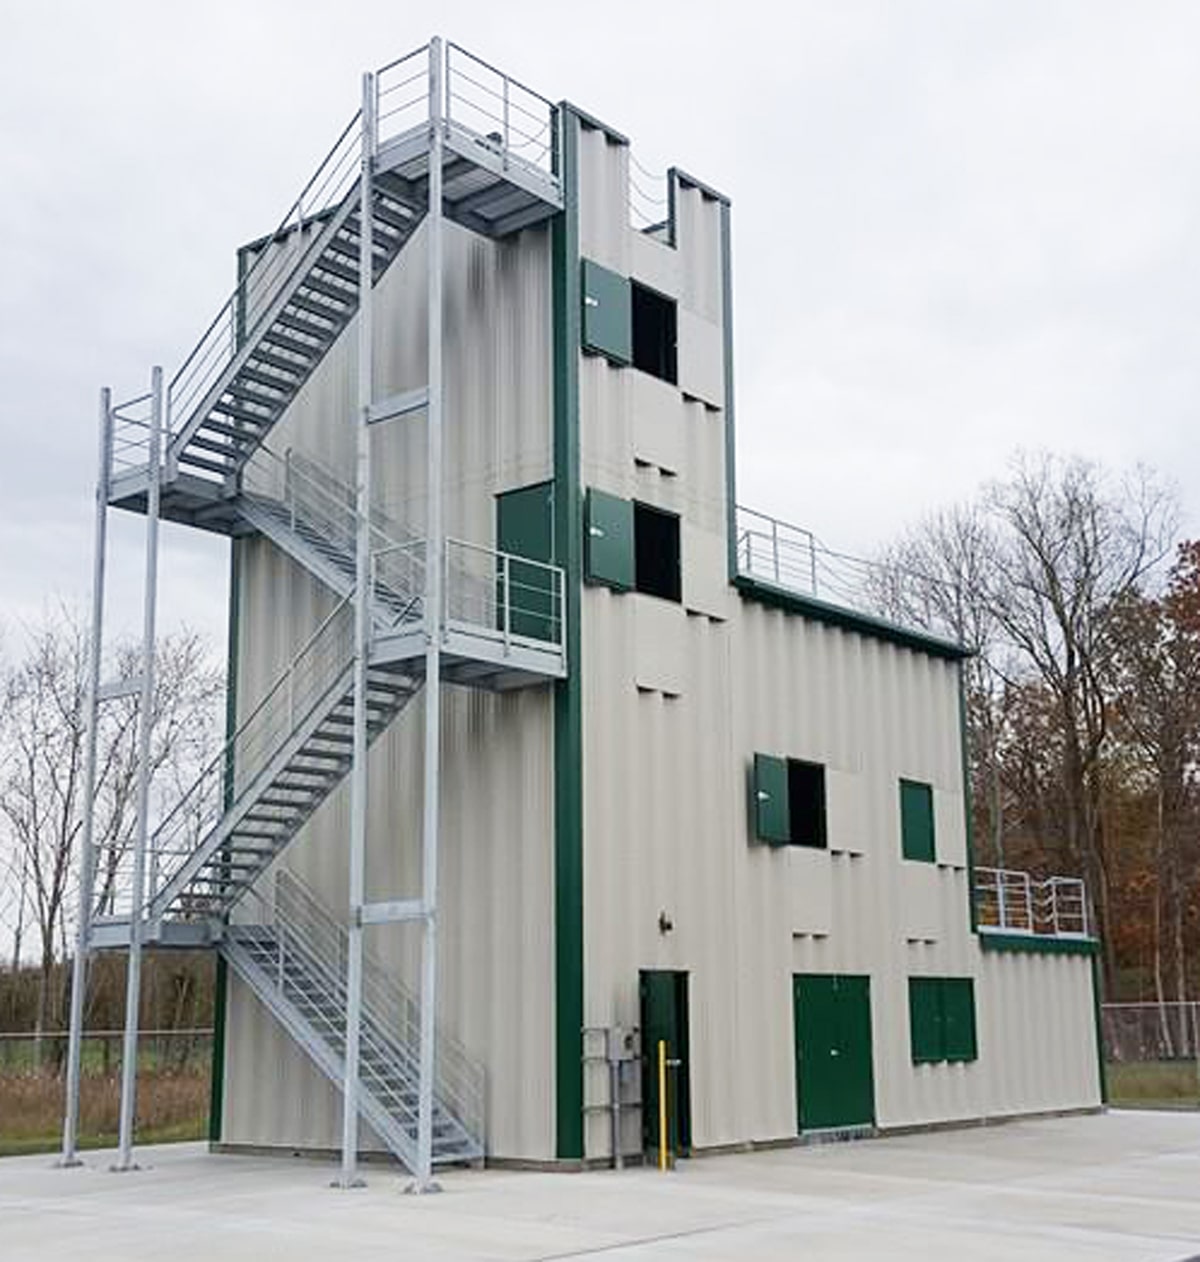 two-story fire training tower